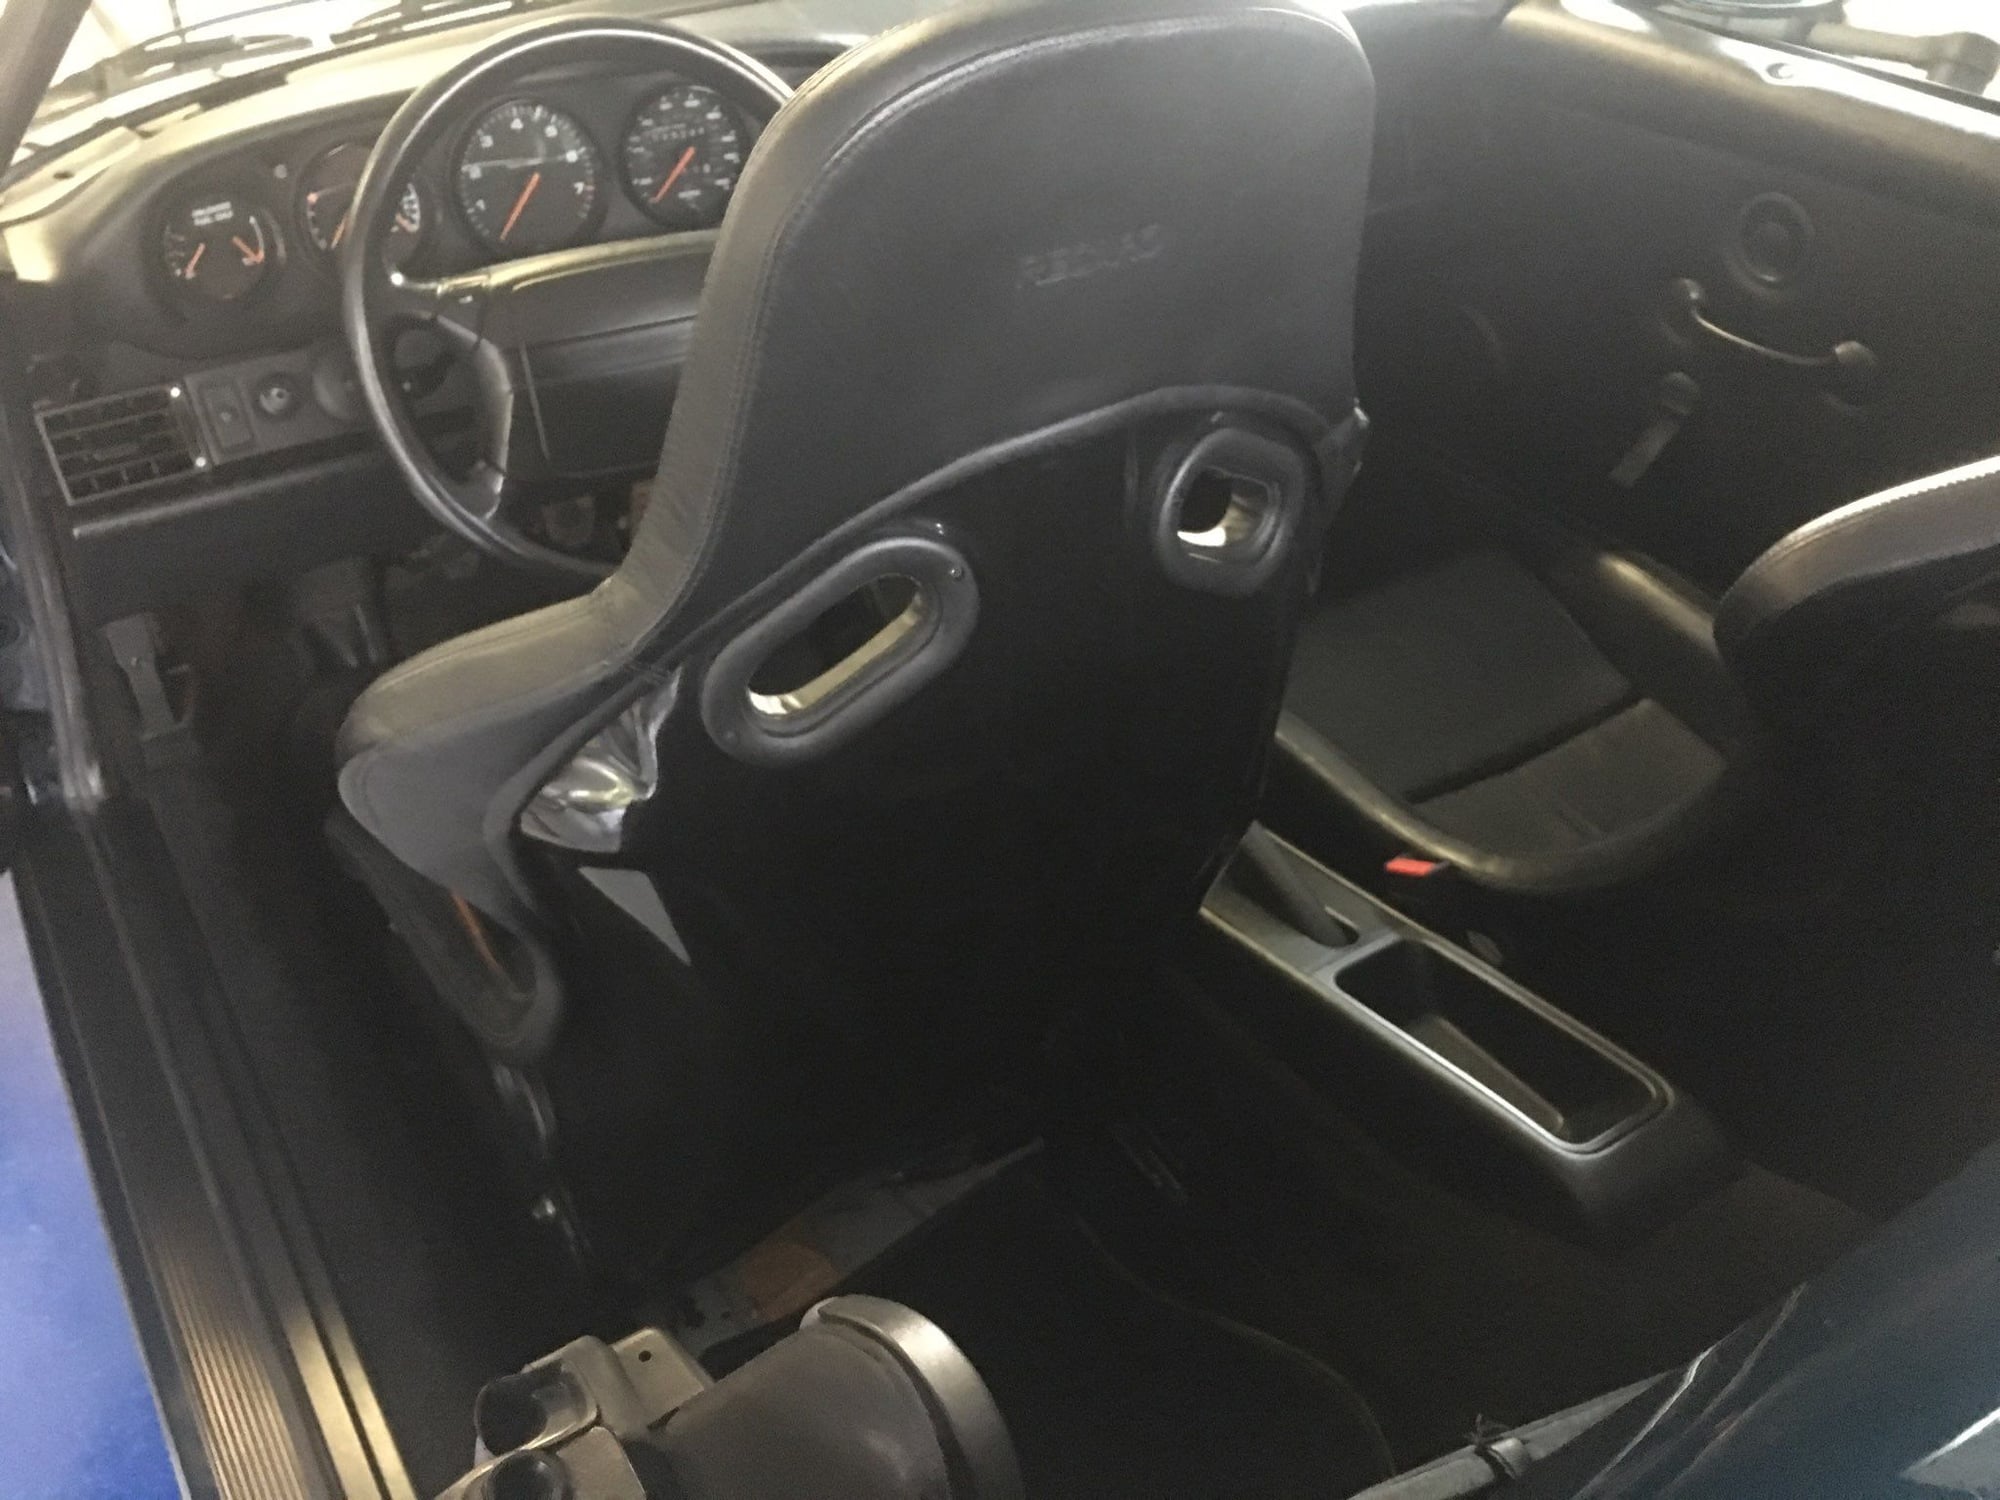 Interior/Upholstery - 964 Porsche/Recaro Factory RS/Speedster Seats in black - excellent condition - Used - West Linn, OR 97068, United States